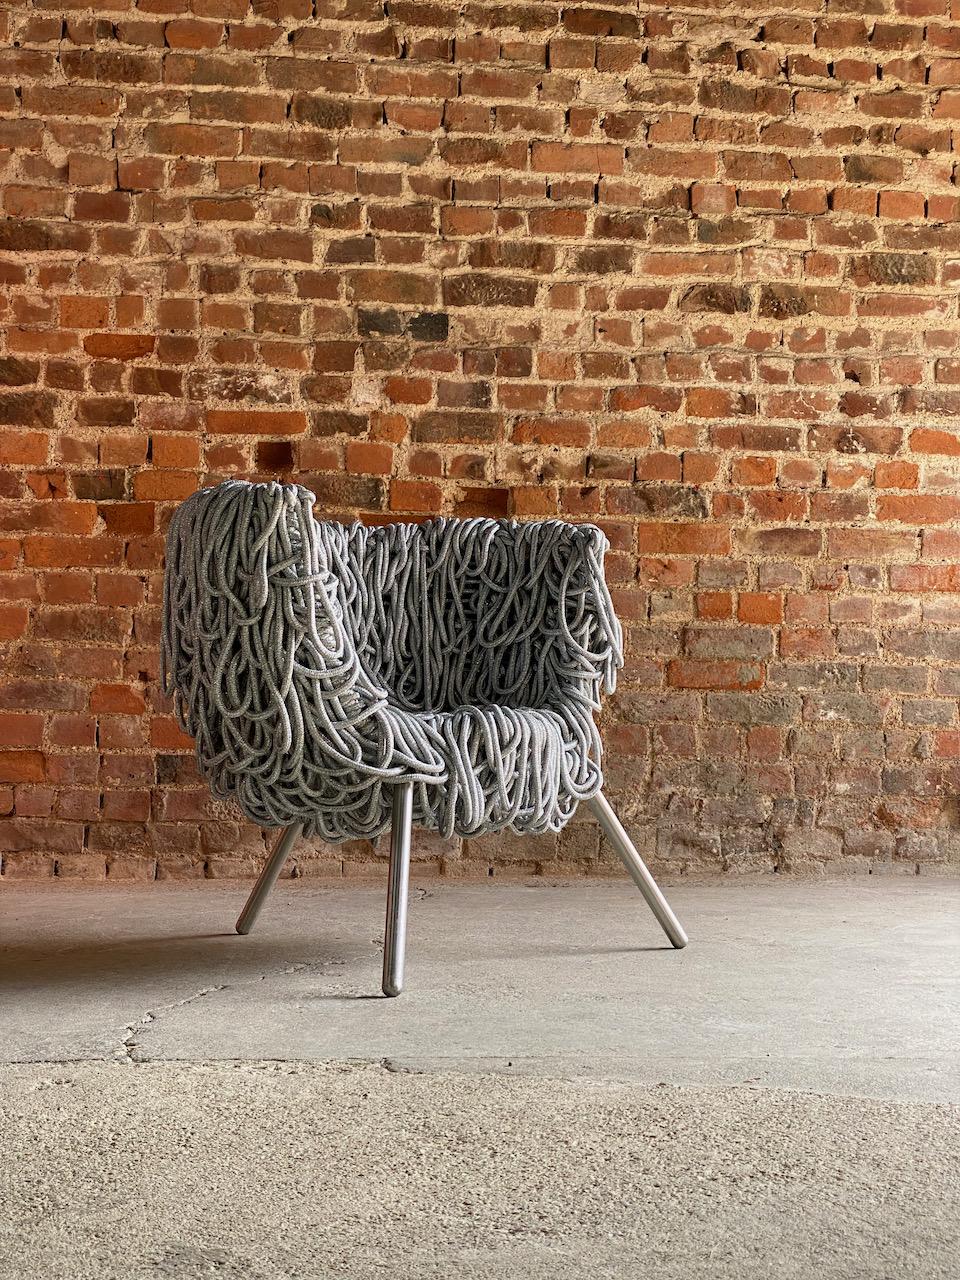 Vermelha chair by Fernando and Humberto Campana Circa 1999

Magnificent Vermelha chair by Fernando and Humberto Campana 1999, the chair finished with 500 meters of silver rope on an epoxy coated aluminium frame, the Vermelha lounge chair is